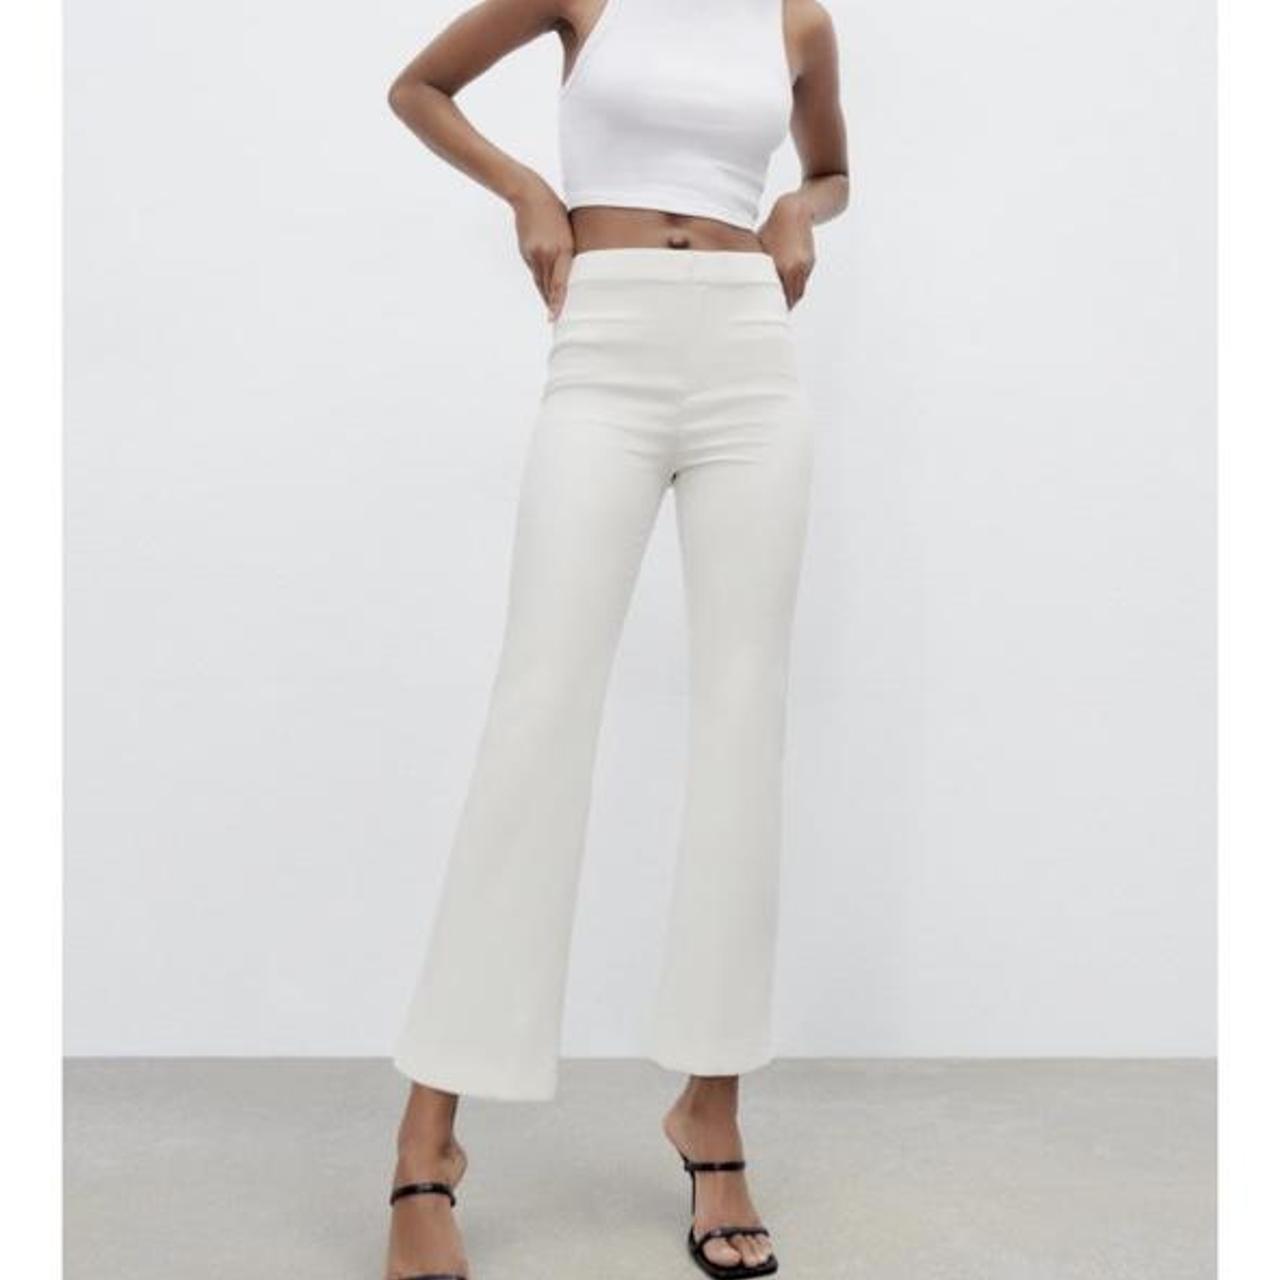 Womens White Jeans  Explore our New Arrivals  ZARA India